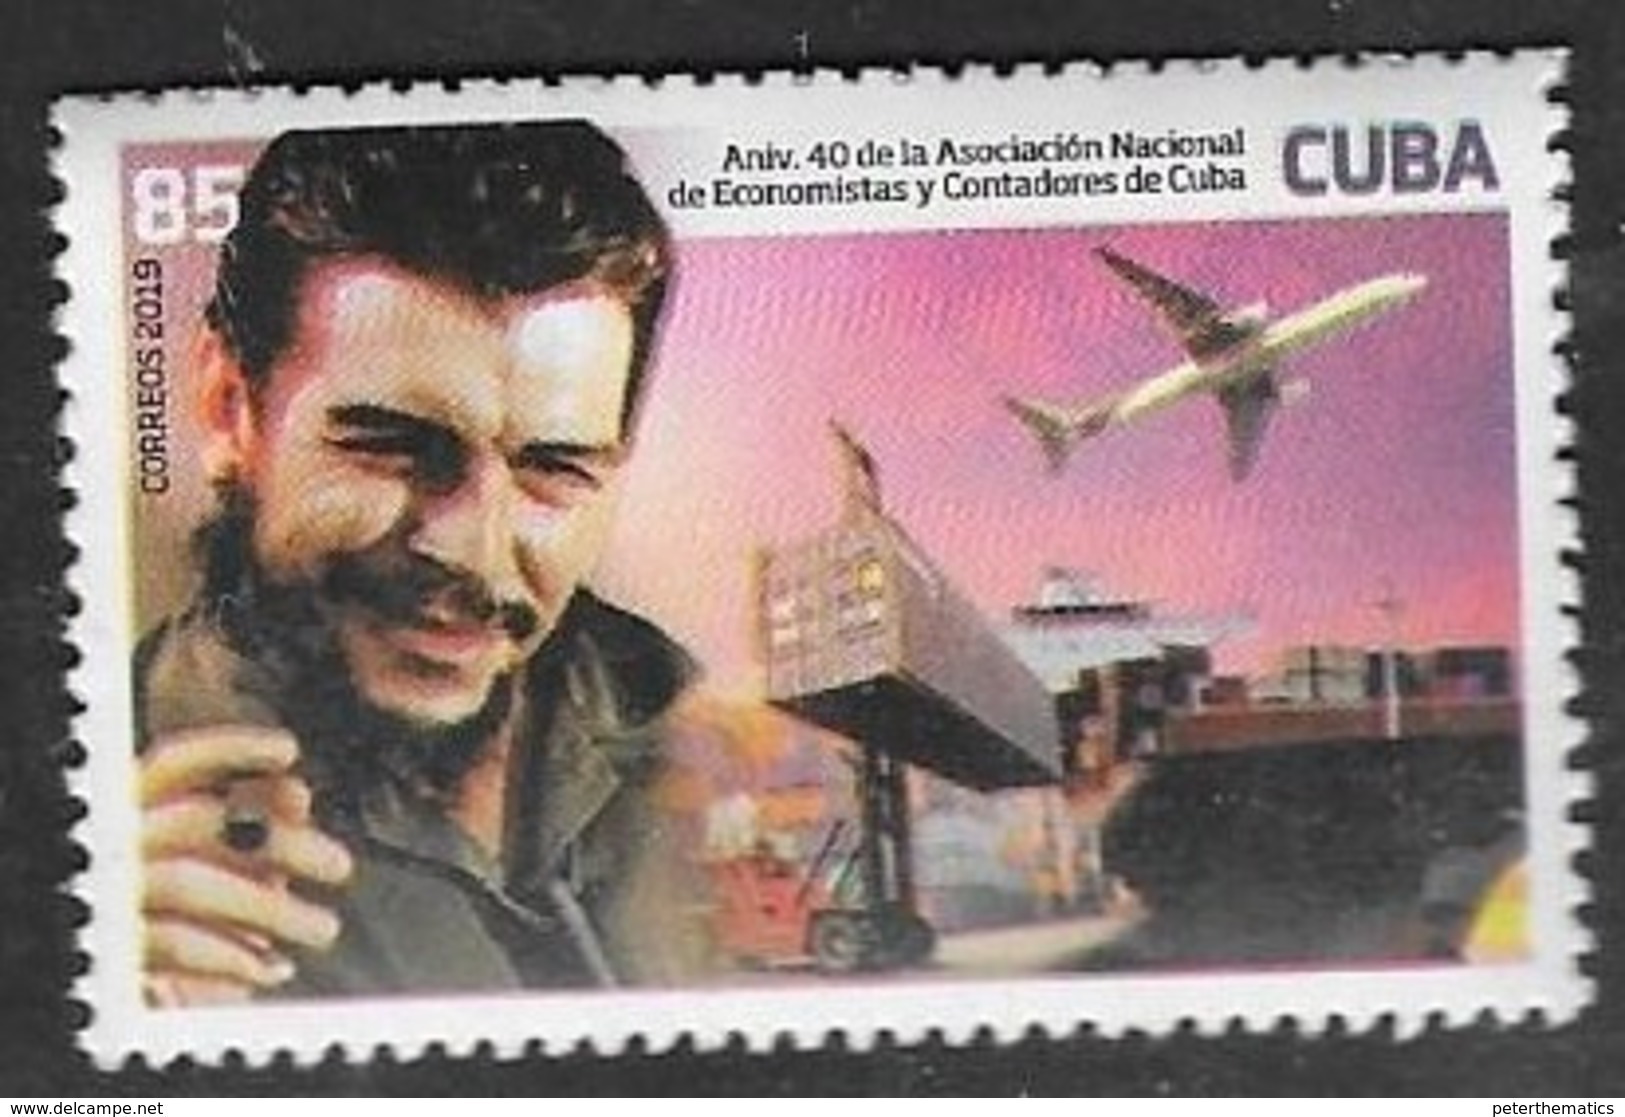 FAMOUS LEADERS, 2019, MNH, ECONOMISTS, ACCOUNTANTS, PLANES, SHIPS, PORTS, FORK LIFTS, CIGARS,  1v - Avions